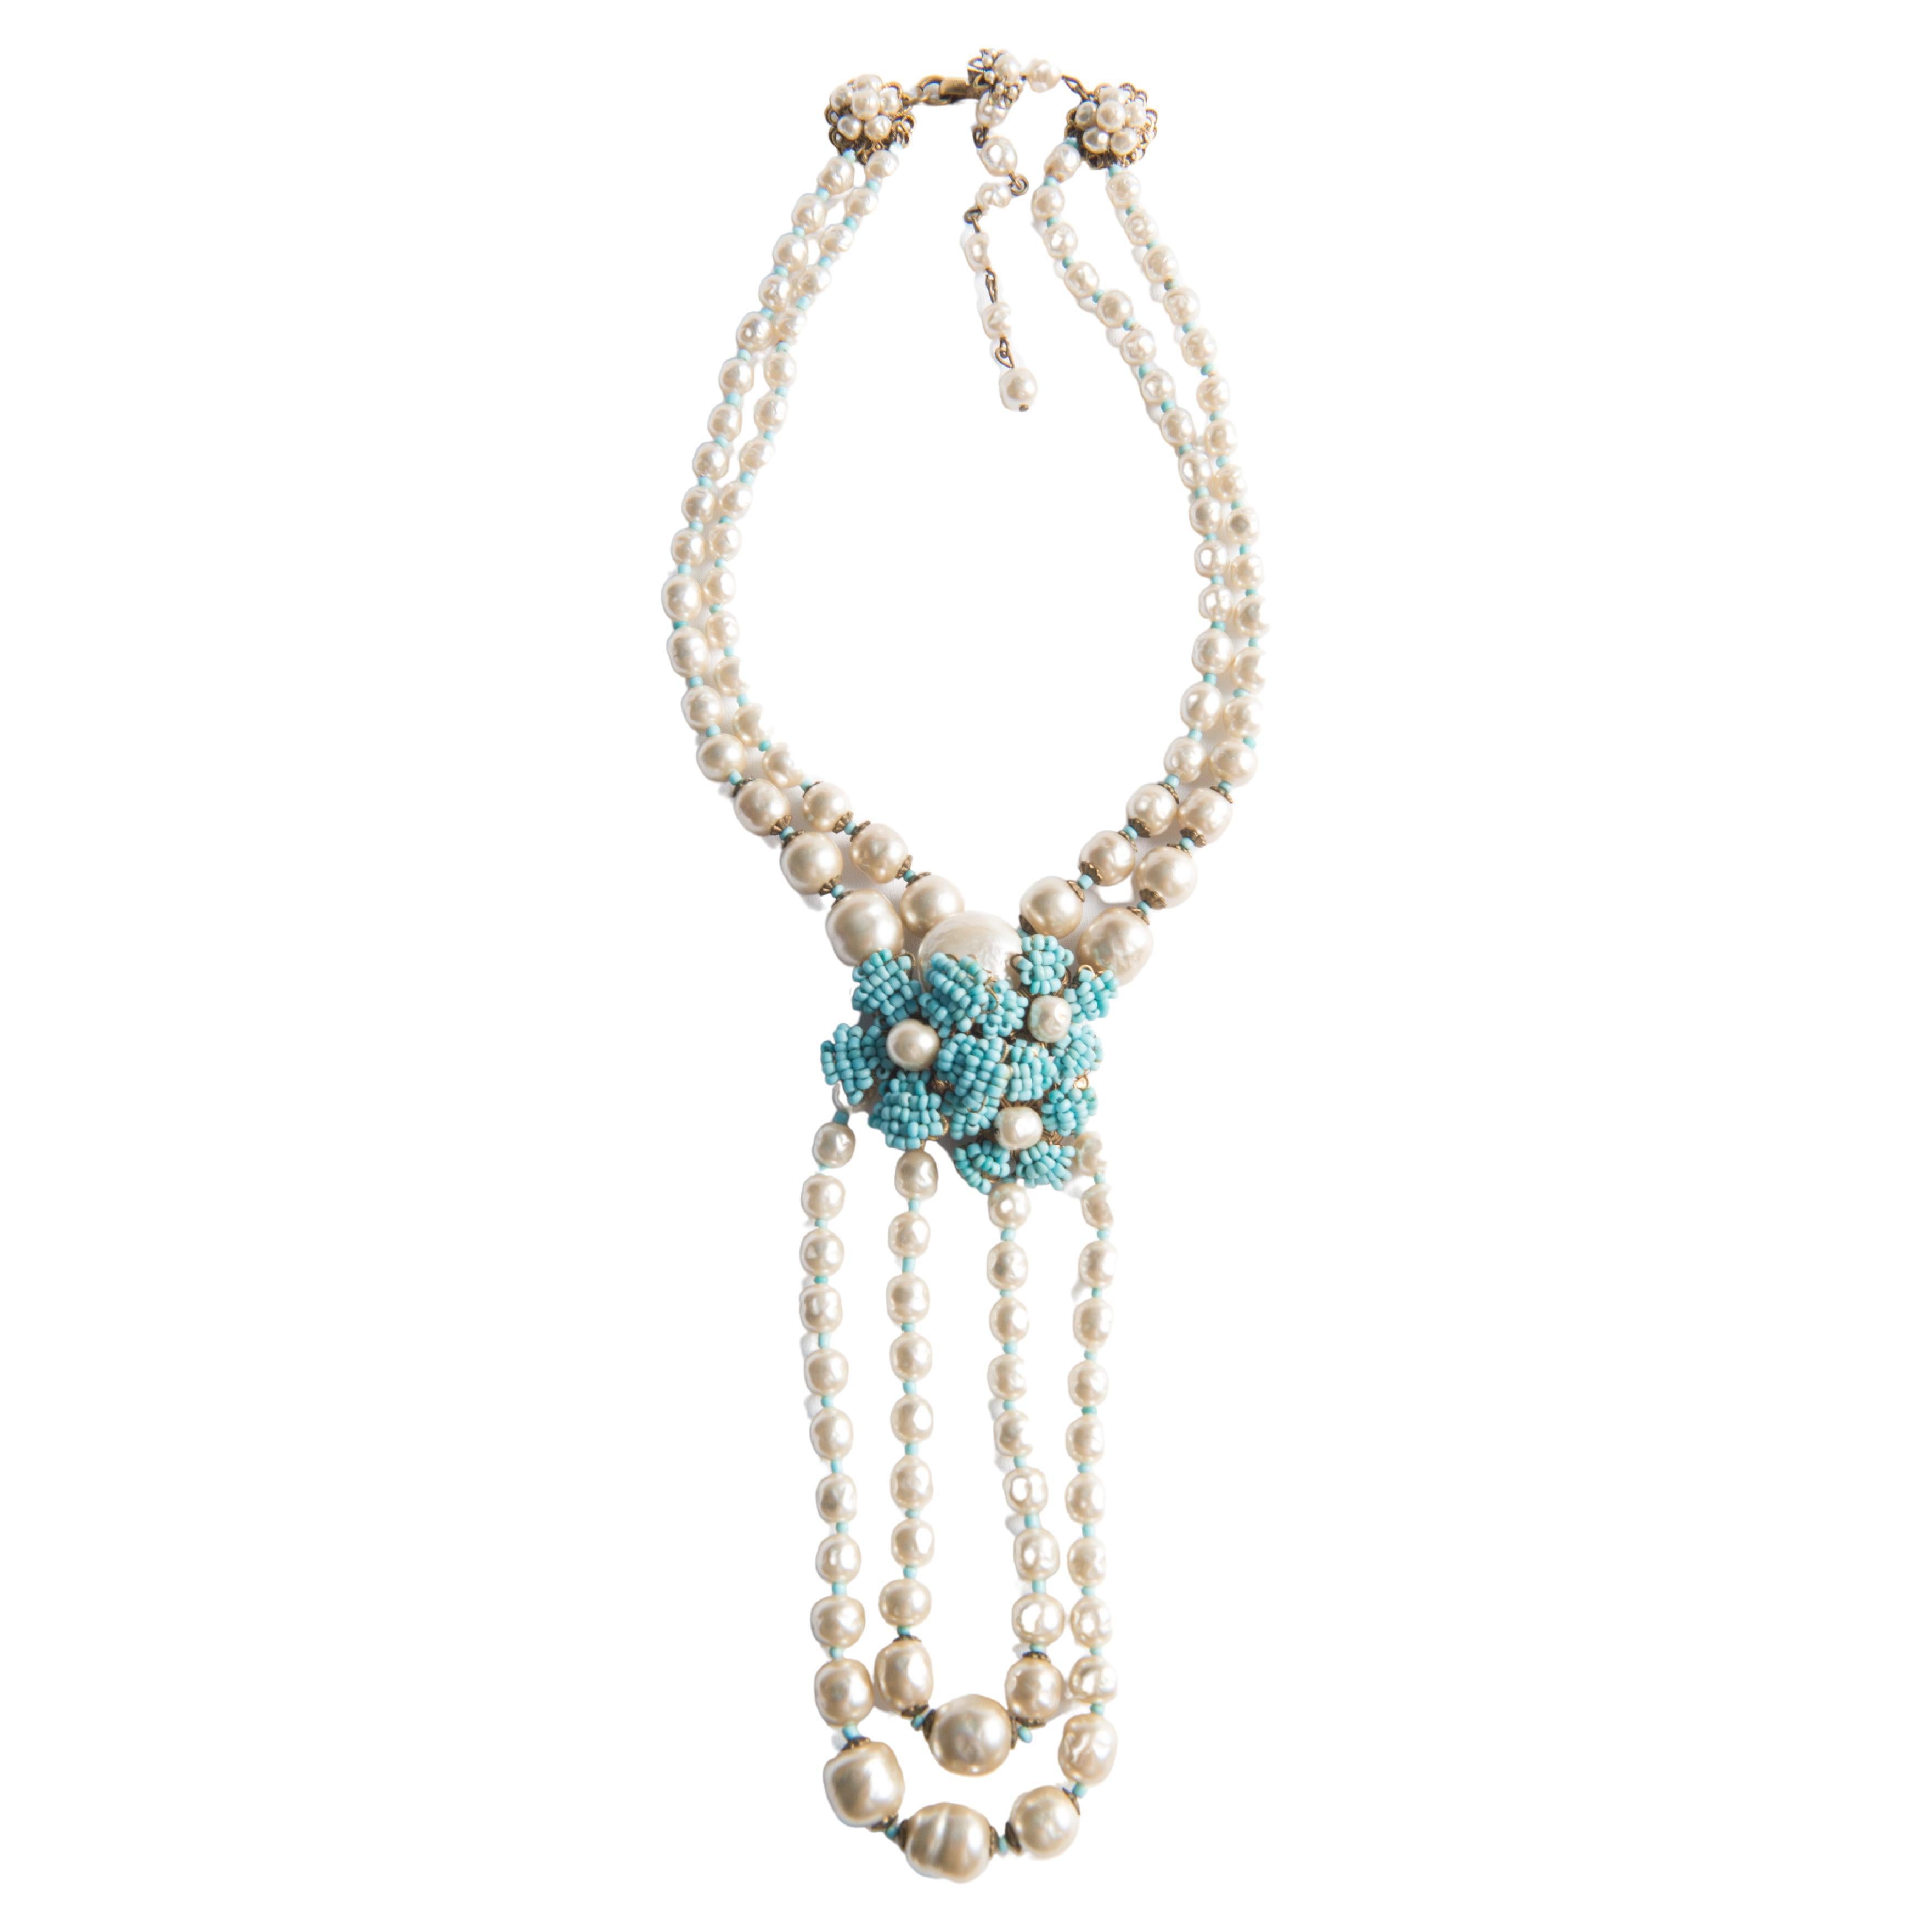 A Miriam Haskell Stunning pearl and turquoise beaded necklace and bracelet set. Necklace cluster and hanging lower double pearl strands are 6